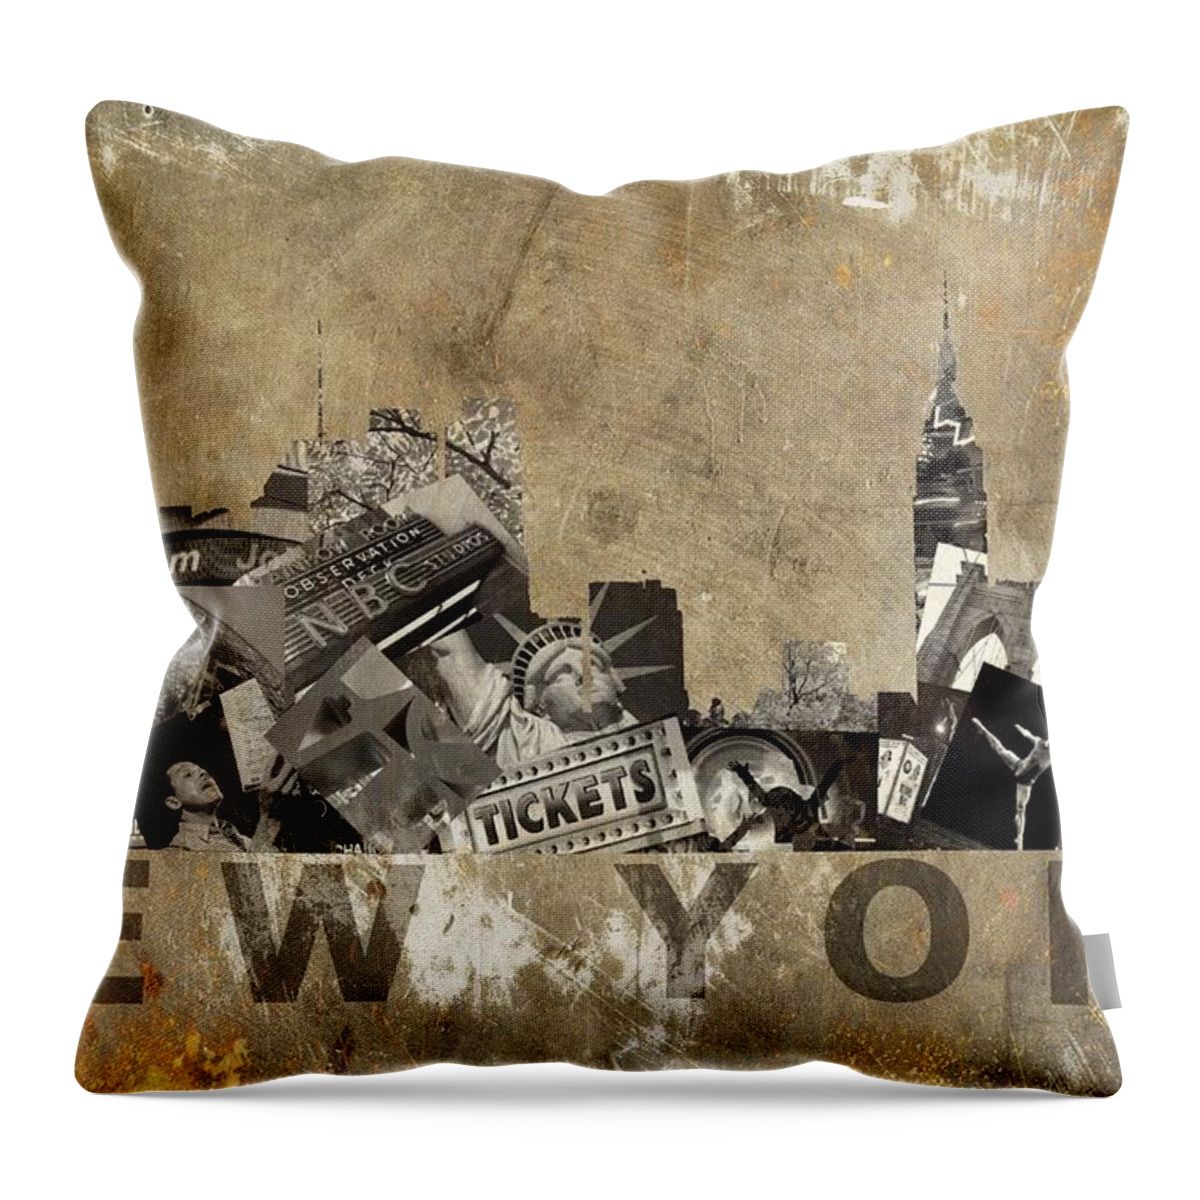 New York In Grunge Throw Pillow featuring the photograph New York City Grunge by Suzanne Powers